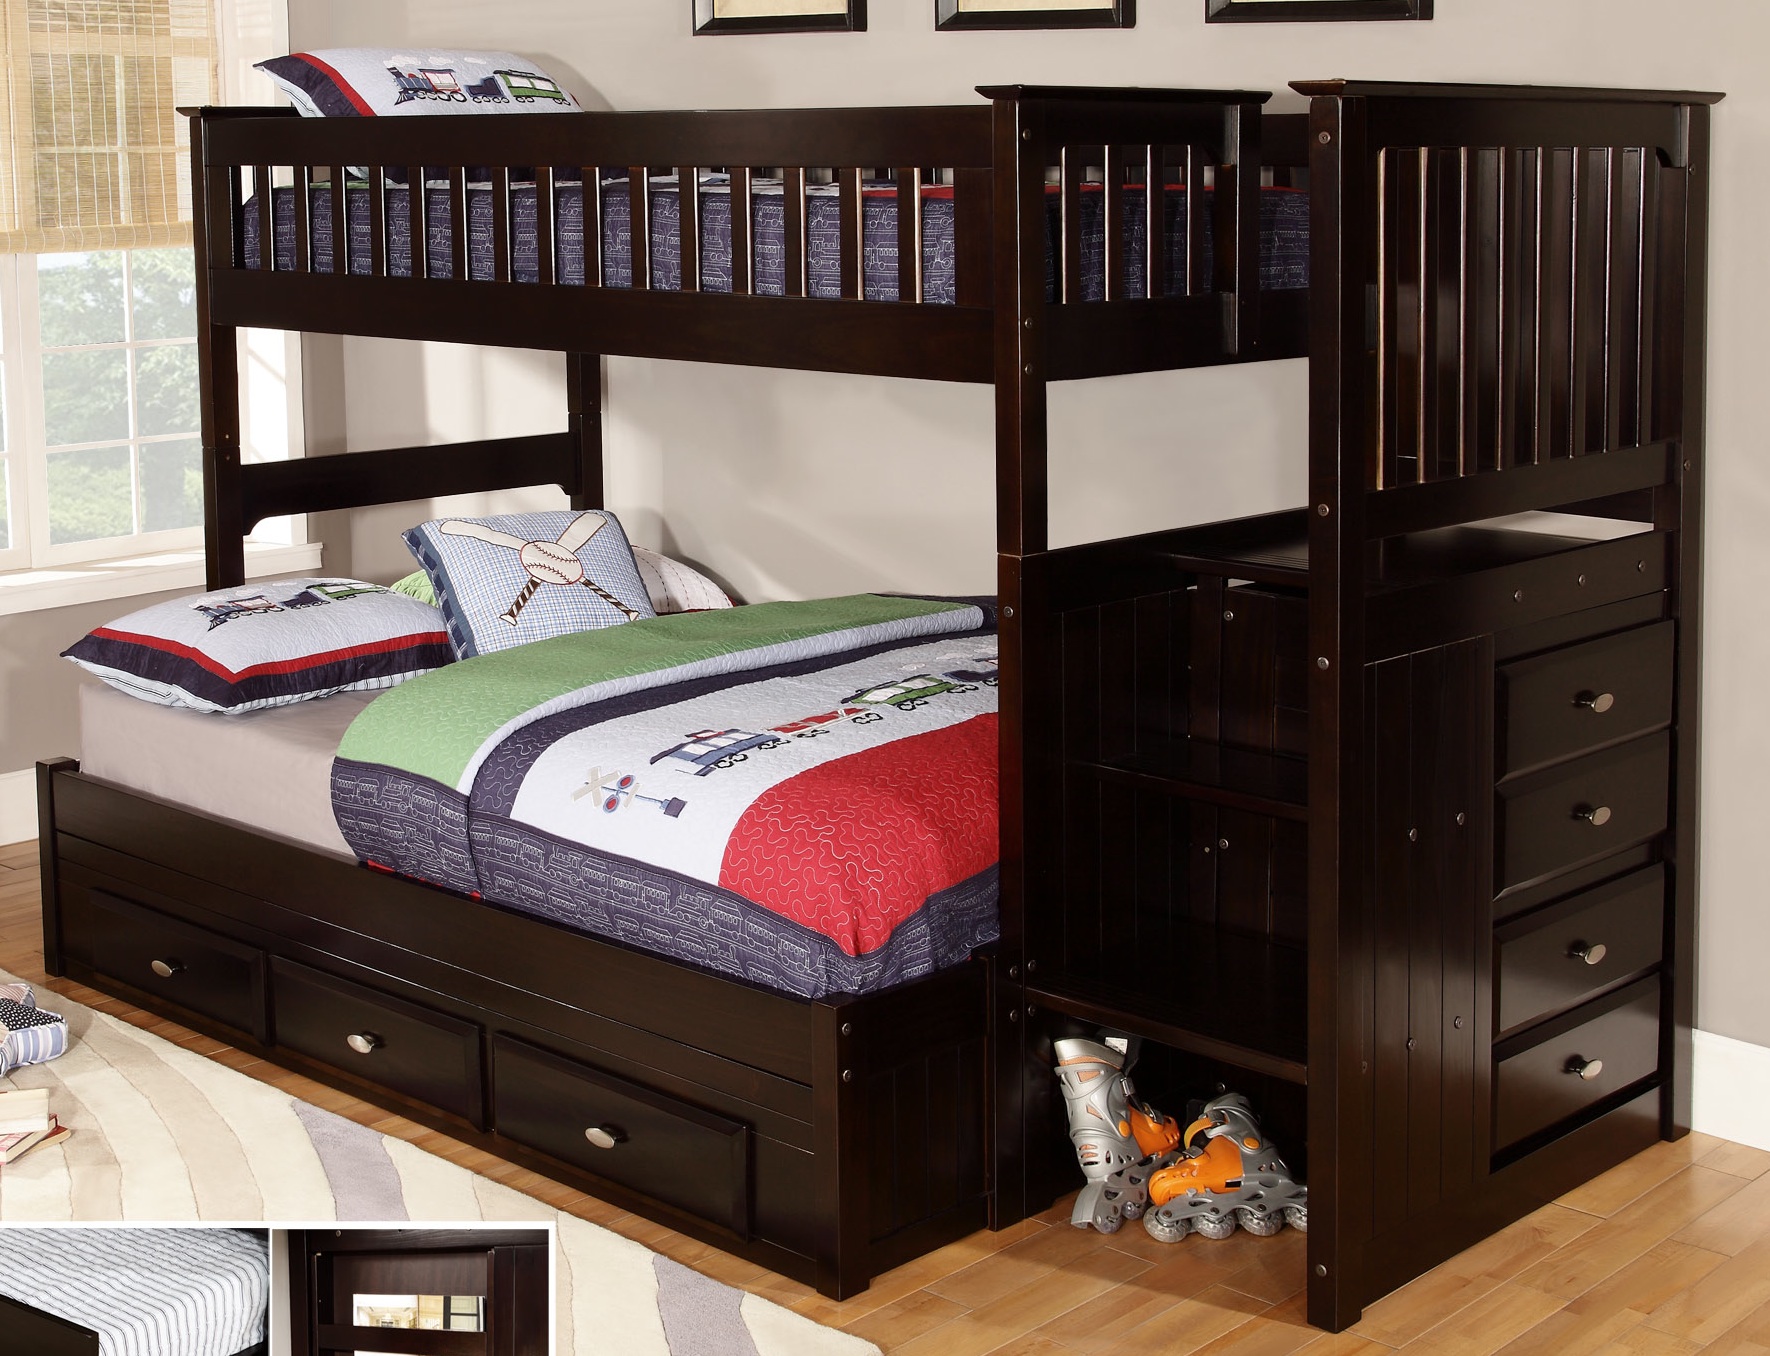 How to buy a bunk bed